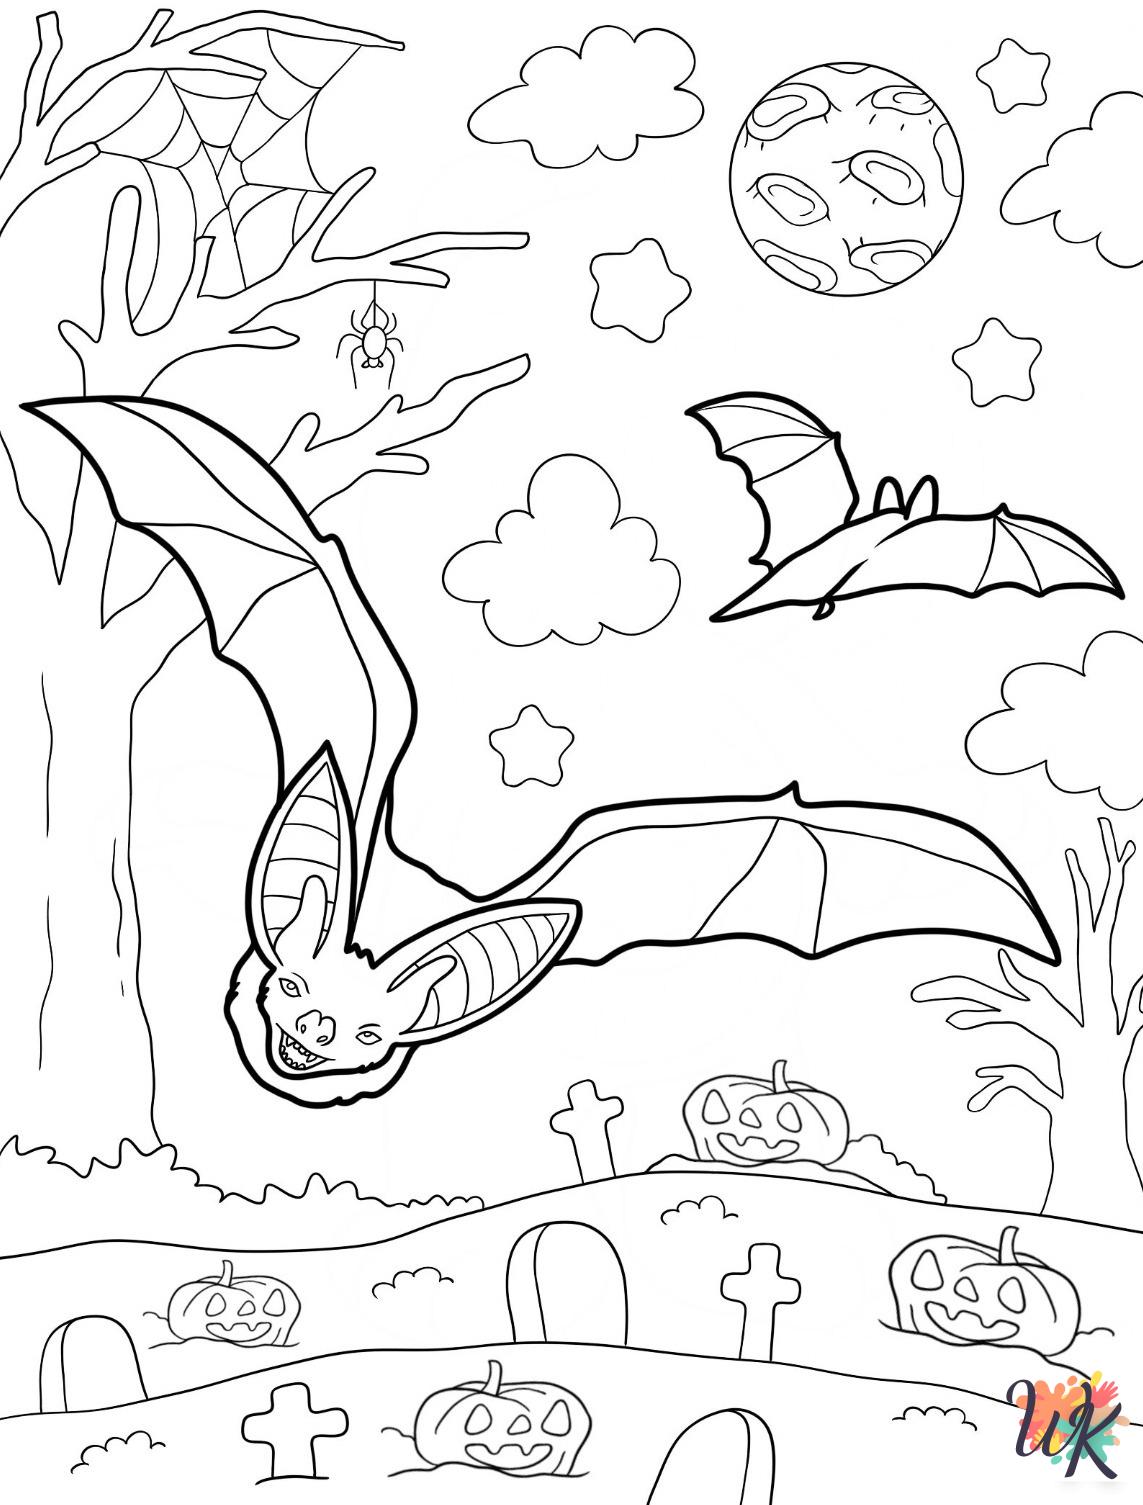 free full size printable Bat coloring pages for adults pdf